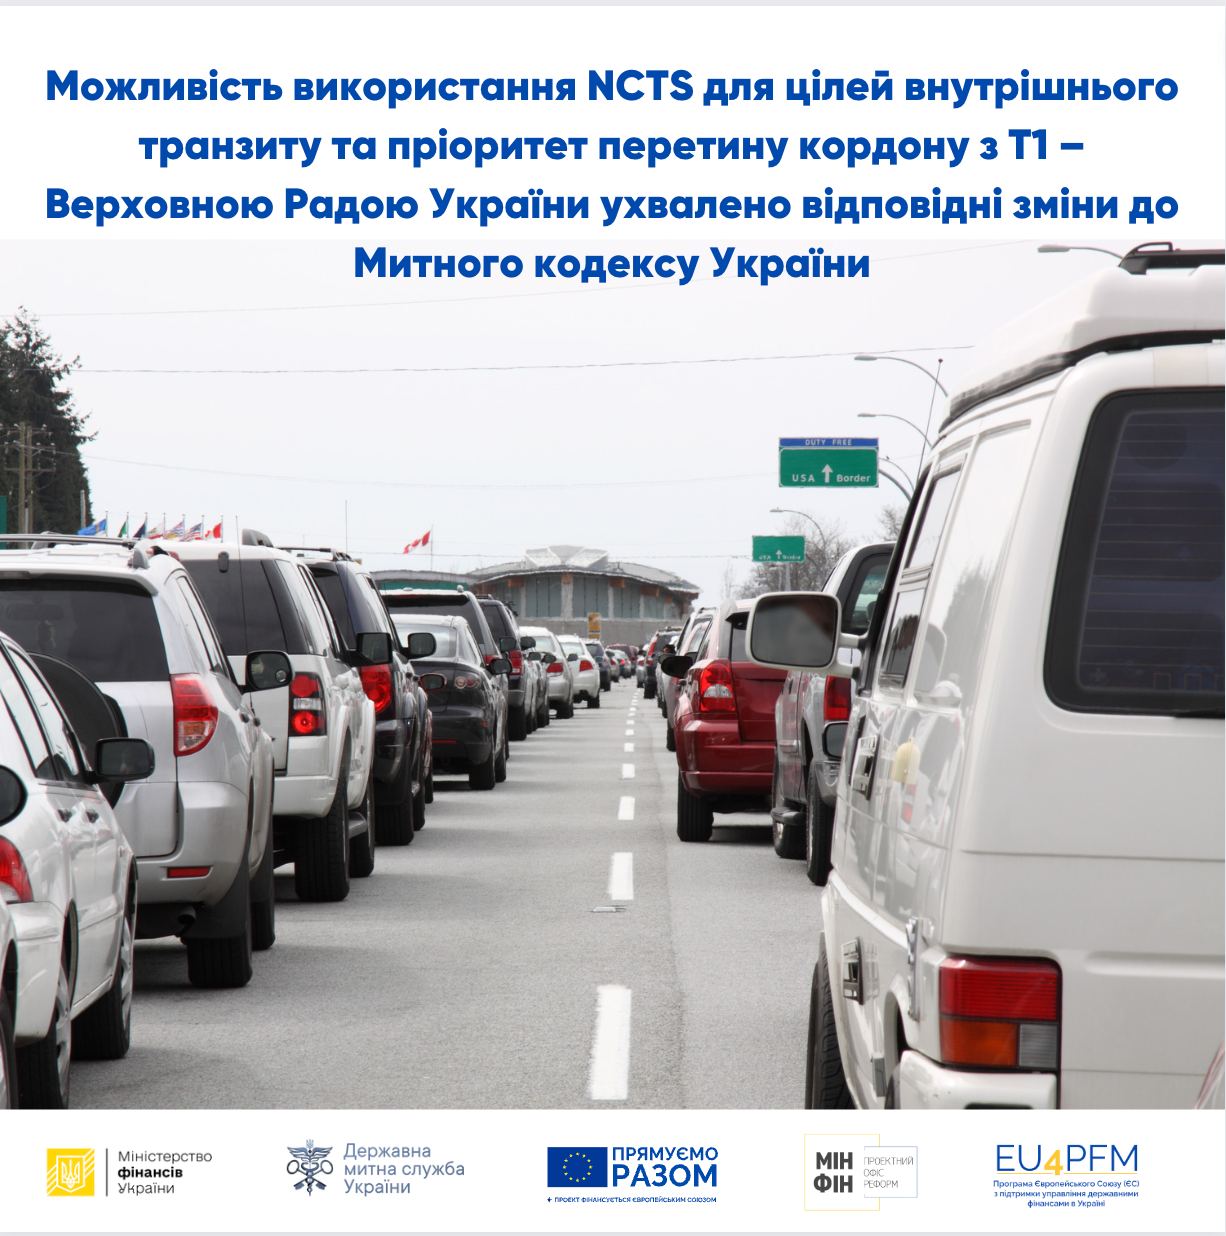 The possibility of using NCTS for internal transit and the priority of crossing the border with T1 – the Verkhovna Rada has adopted changes to the Customs Code of Ukraine